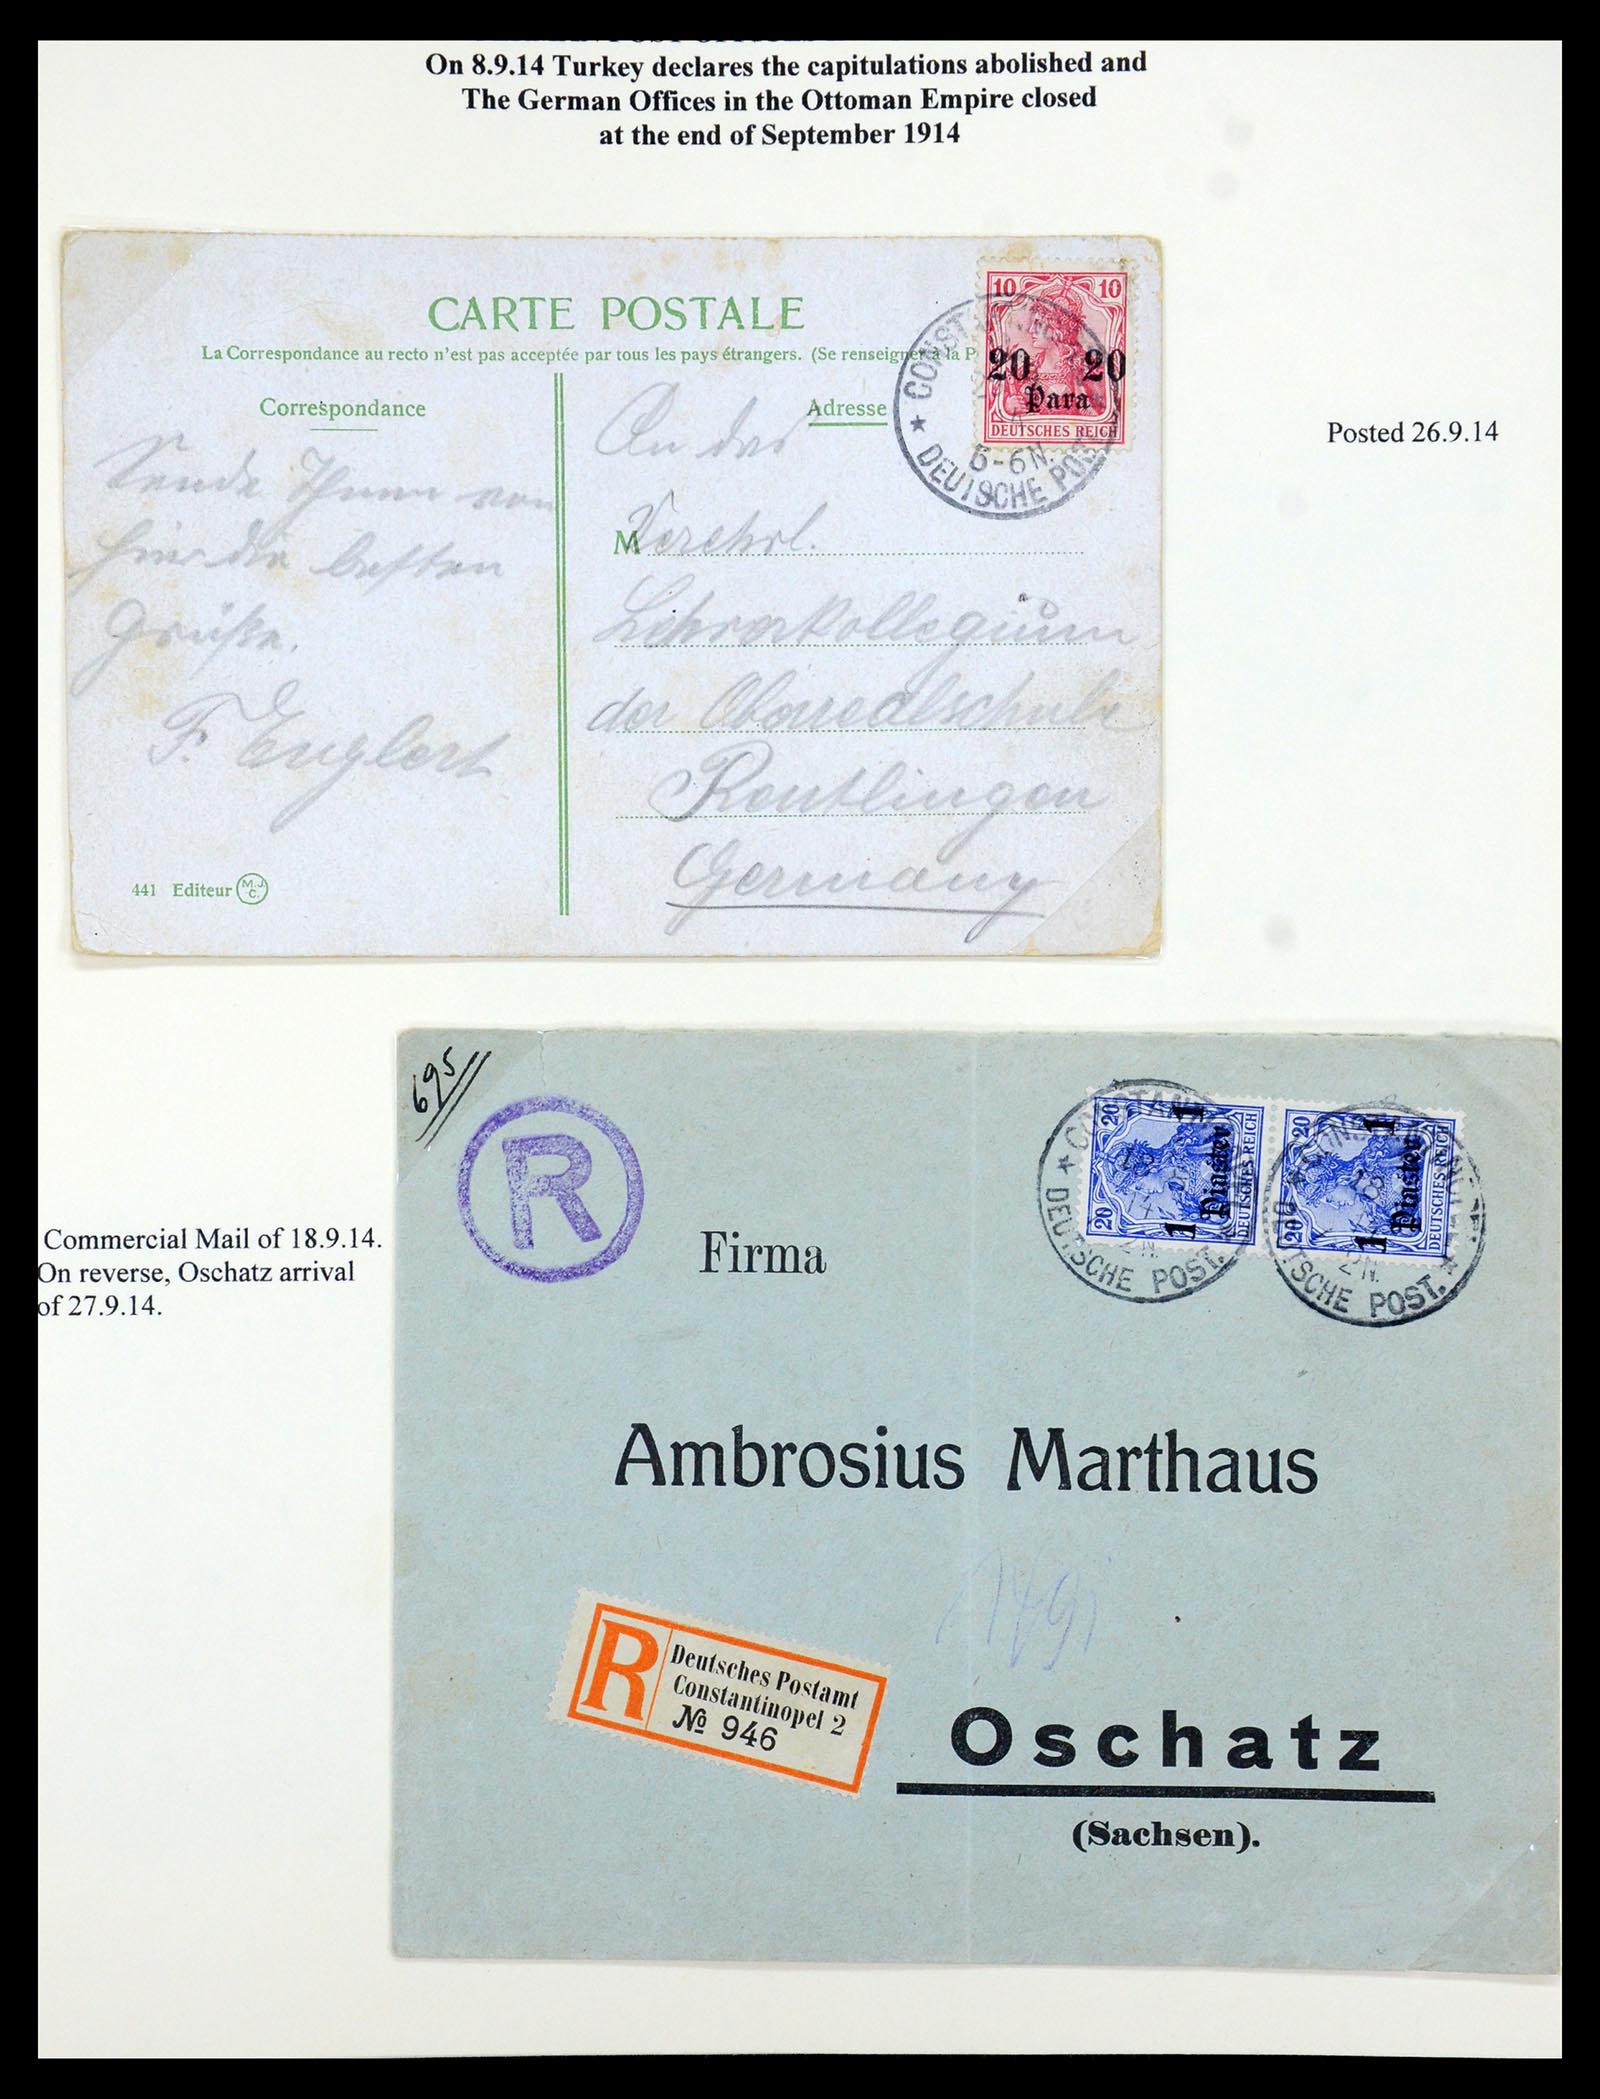 35515 055 - Stamp Collection 35515 Germany covers og Military mission in Turkey 1914